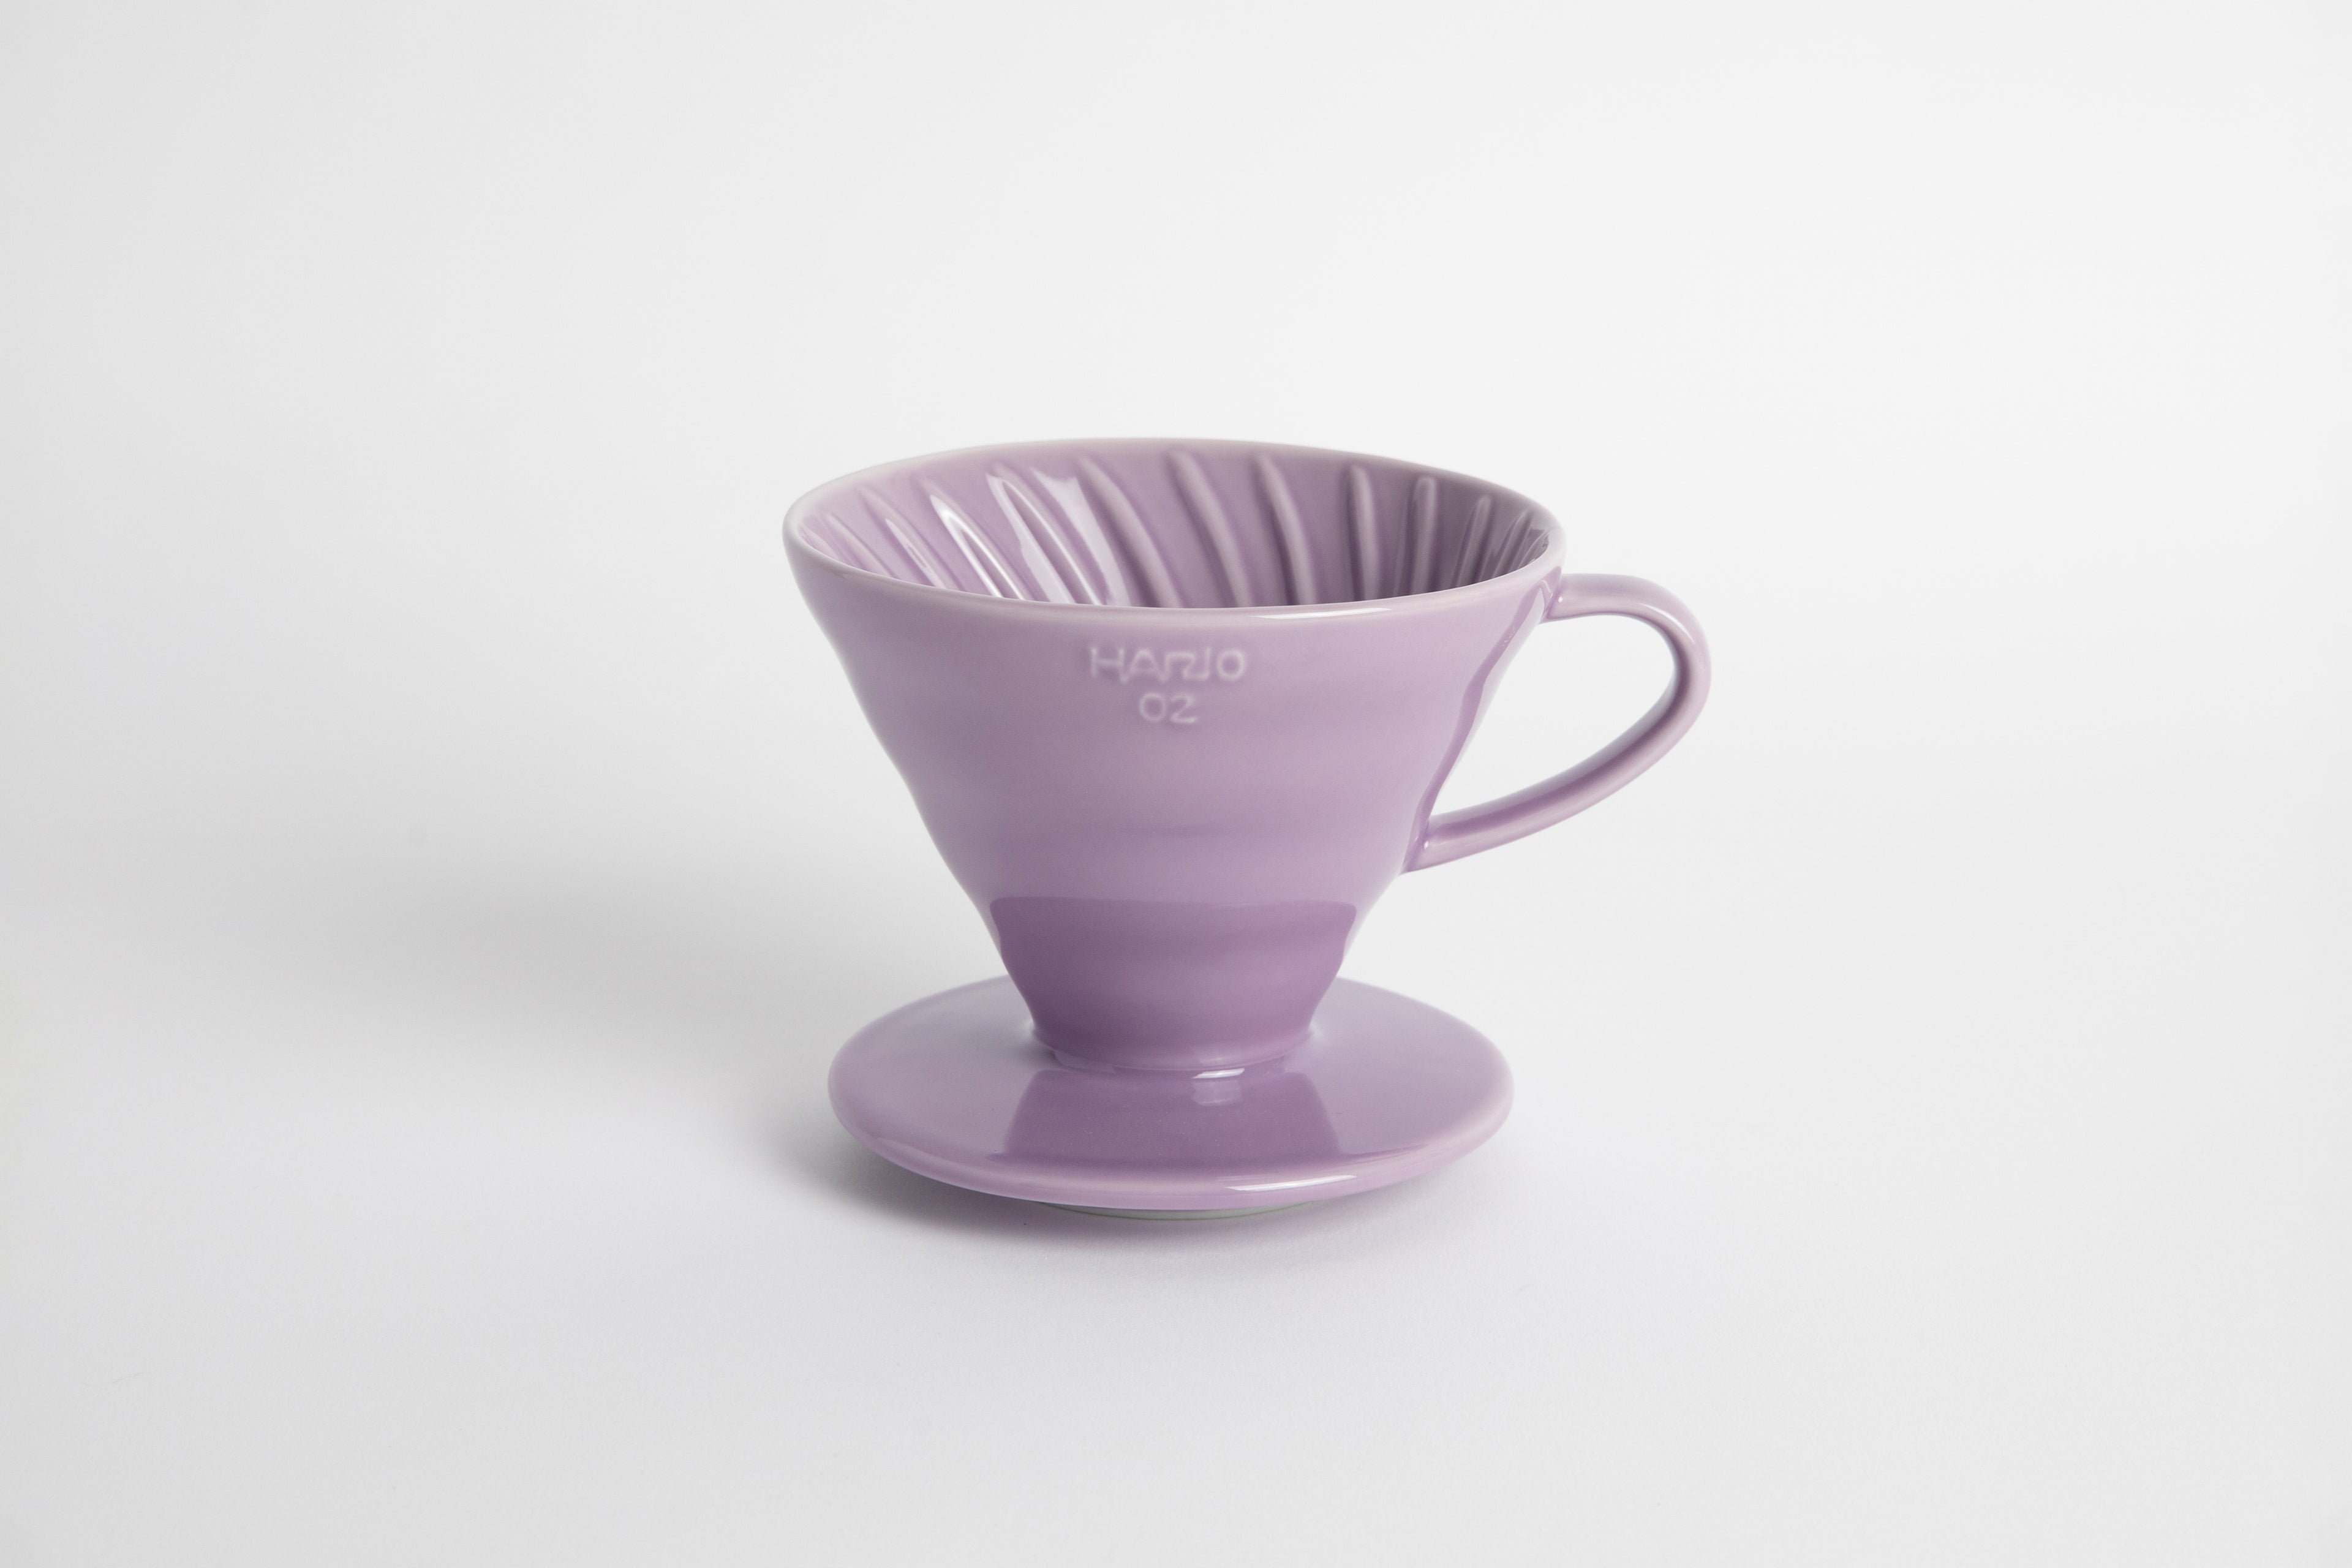 Purple Heather 60 degree cone shaped ceramic coffee dripper with handle and round base. Spiral ribbed on the inside cone. Set on white background